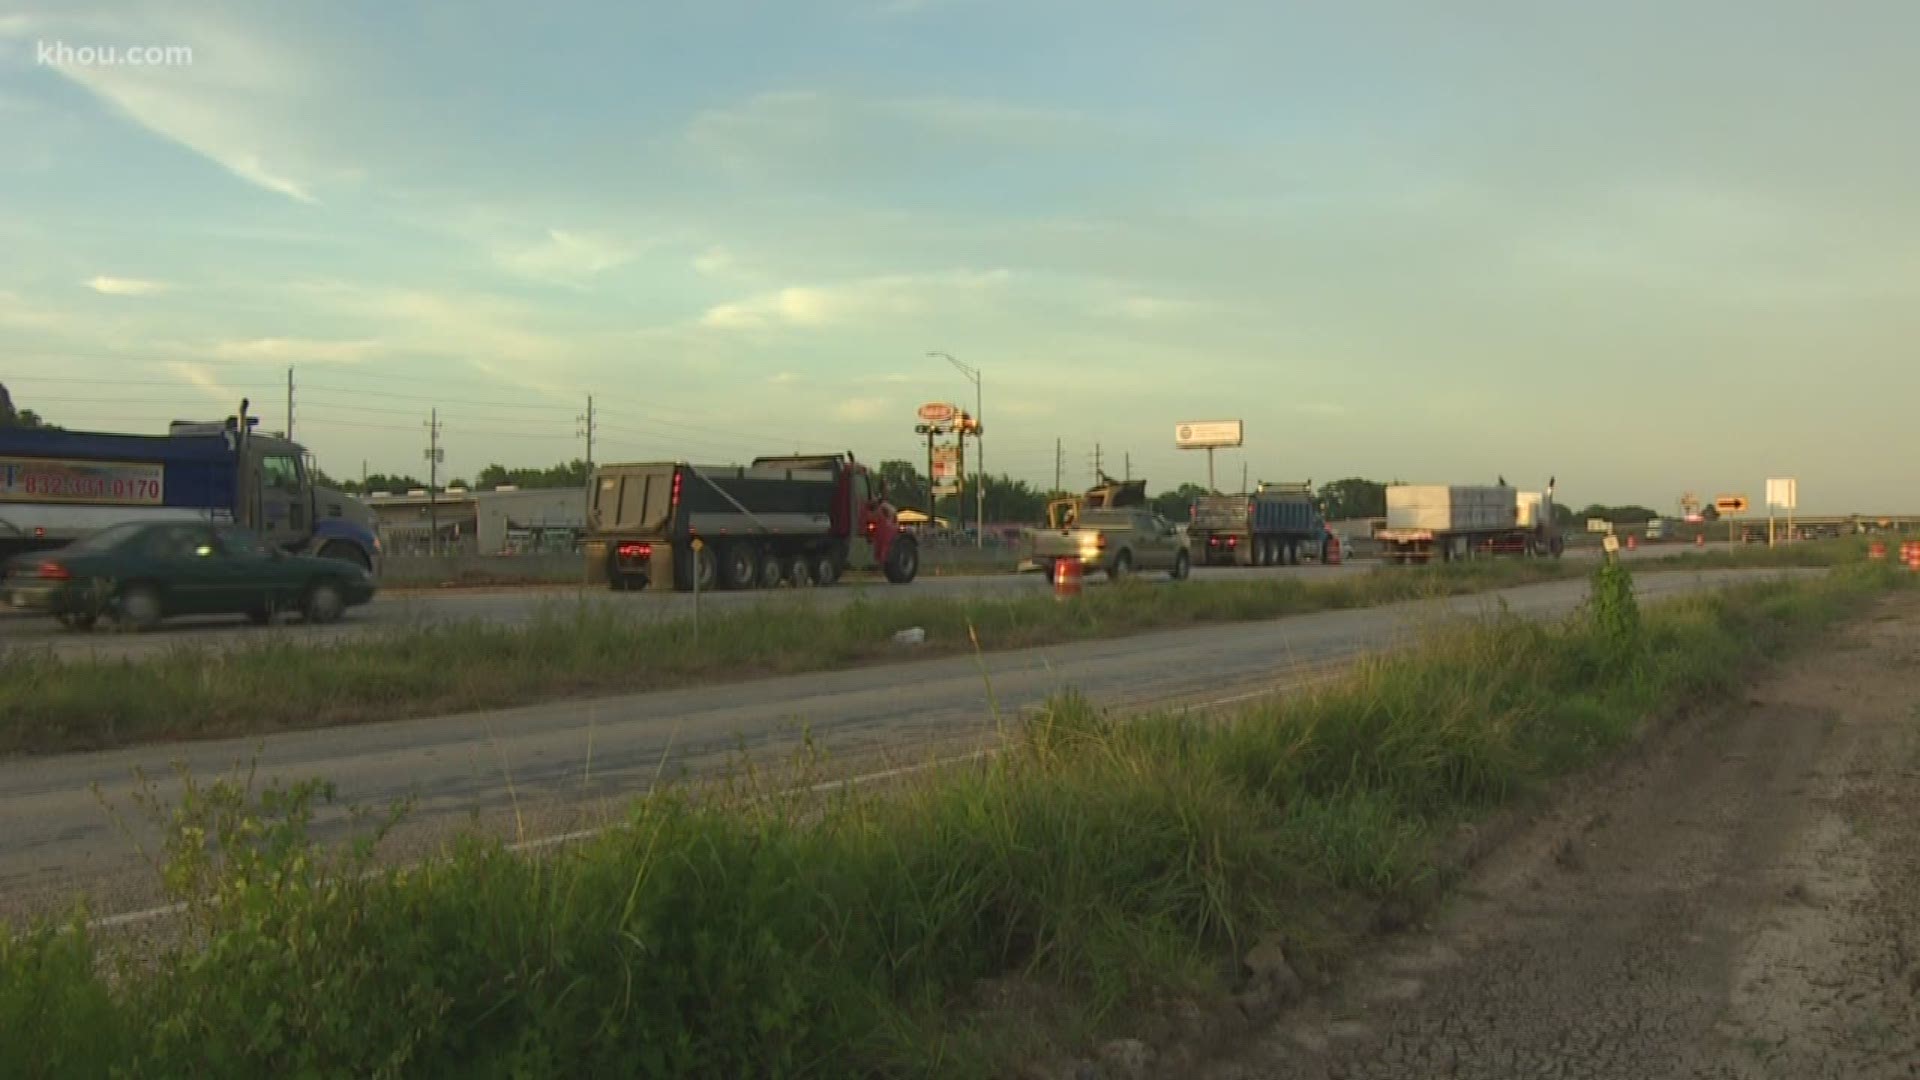 Last weekend, some drivers spent up to five hours on a bridge between Sealy and Brookshire, but they said it felt worse to not even get a warning of the delay.